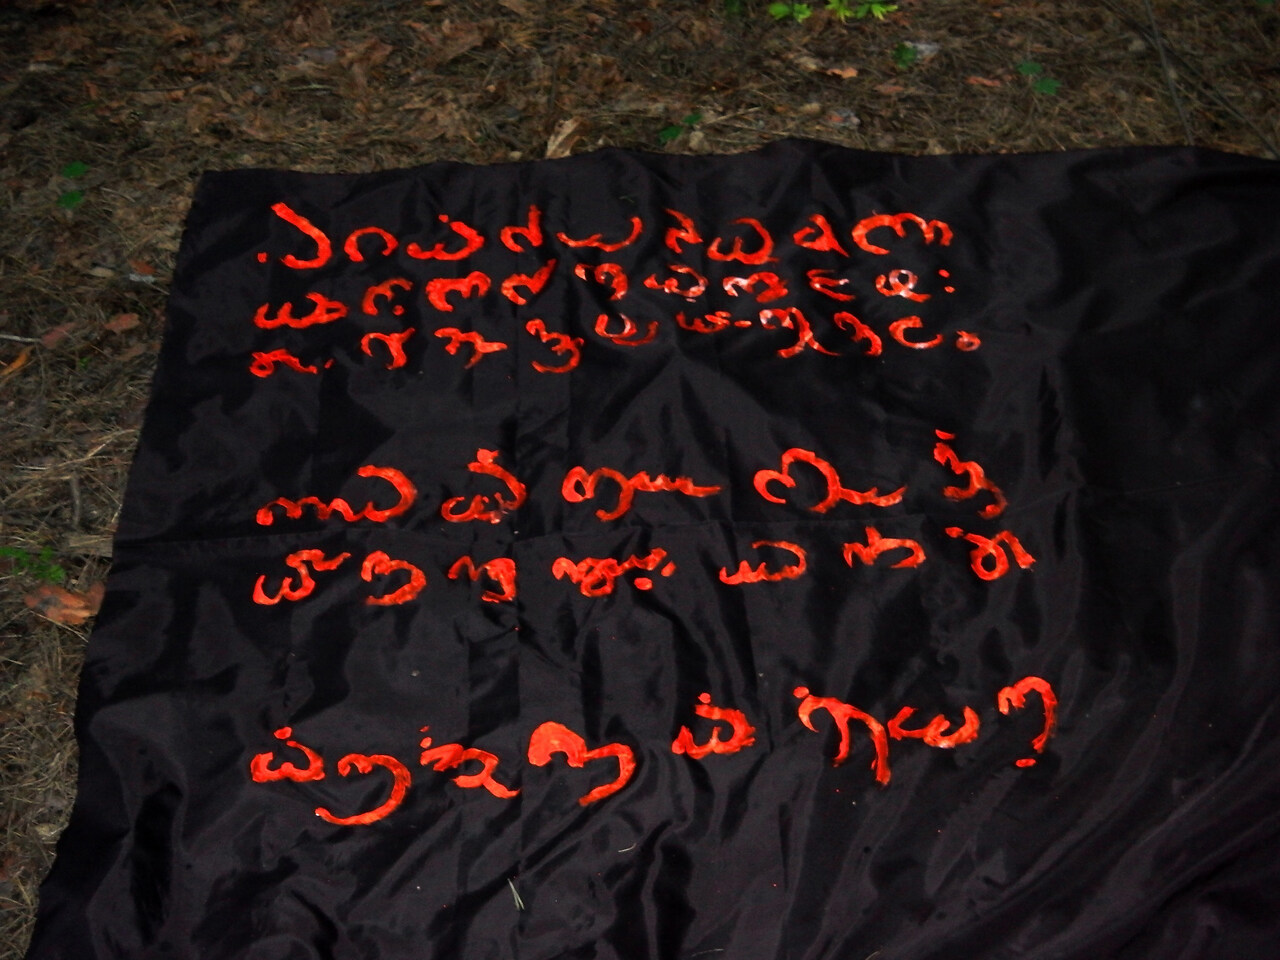 Tae Ateh. Asemic Intervention in the Forest. Workshop documentation. - Tae Ateh  - provided by the author